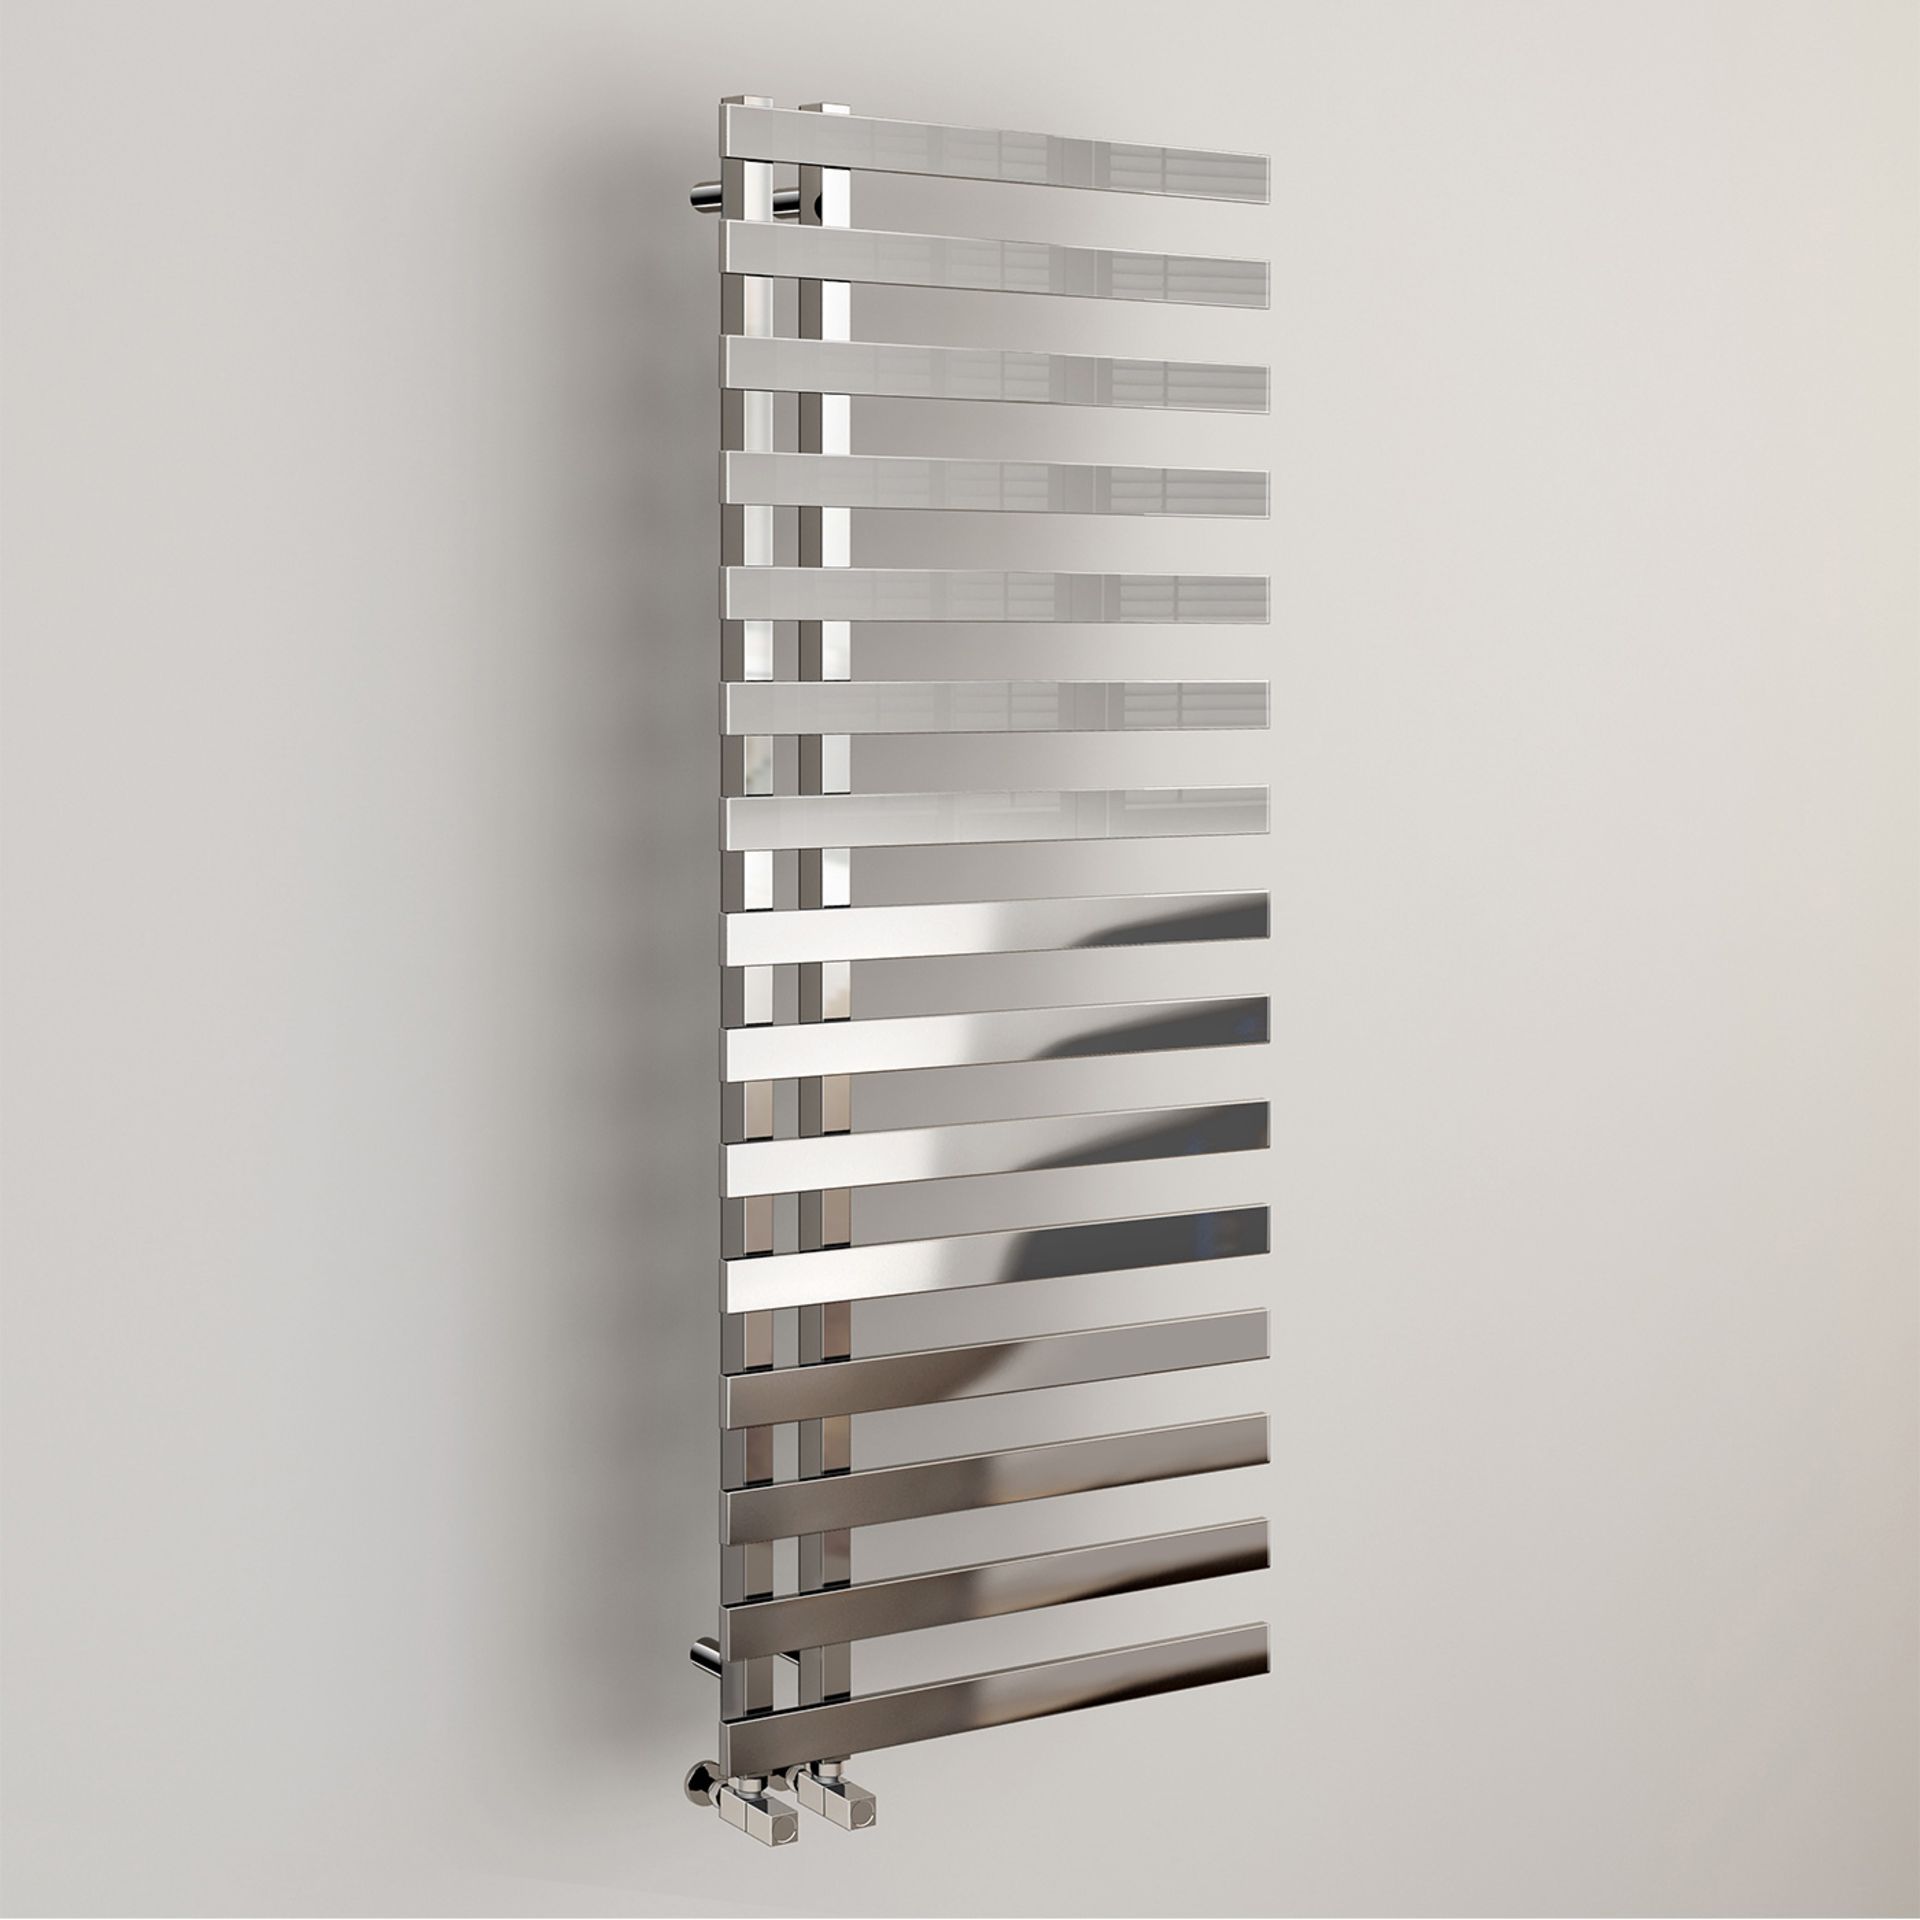 AA60- 1569x600mm Stainless Steel Designer Towel Radiator - Polished Finish. RRP £499.99 We bring you - Image 2 of 3